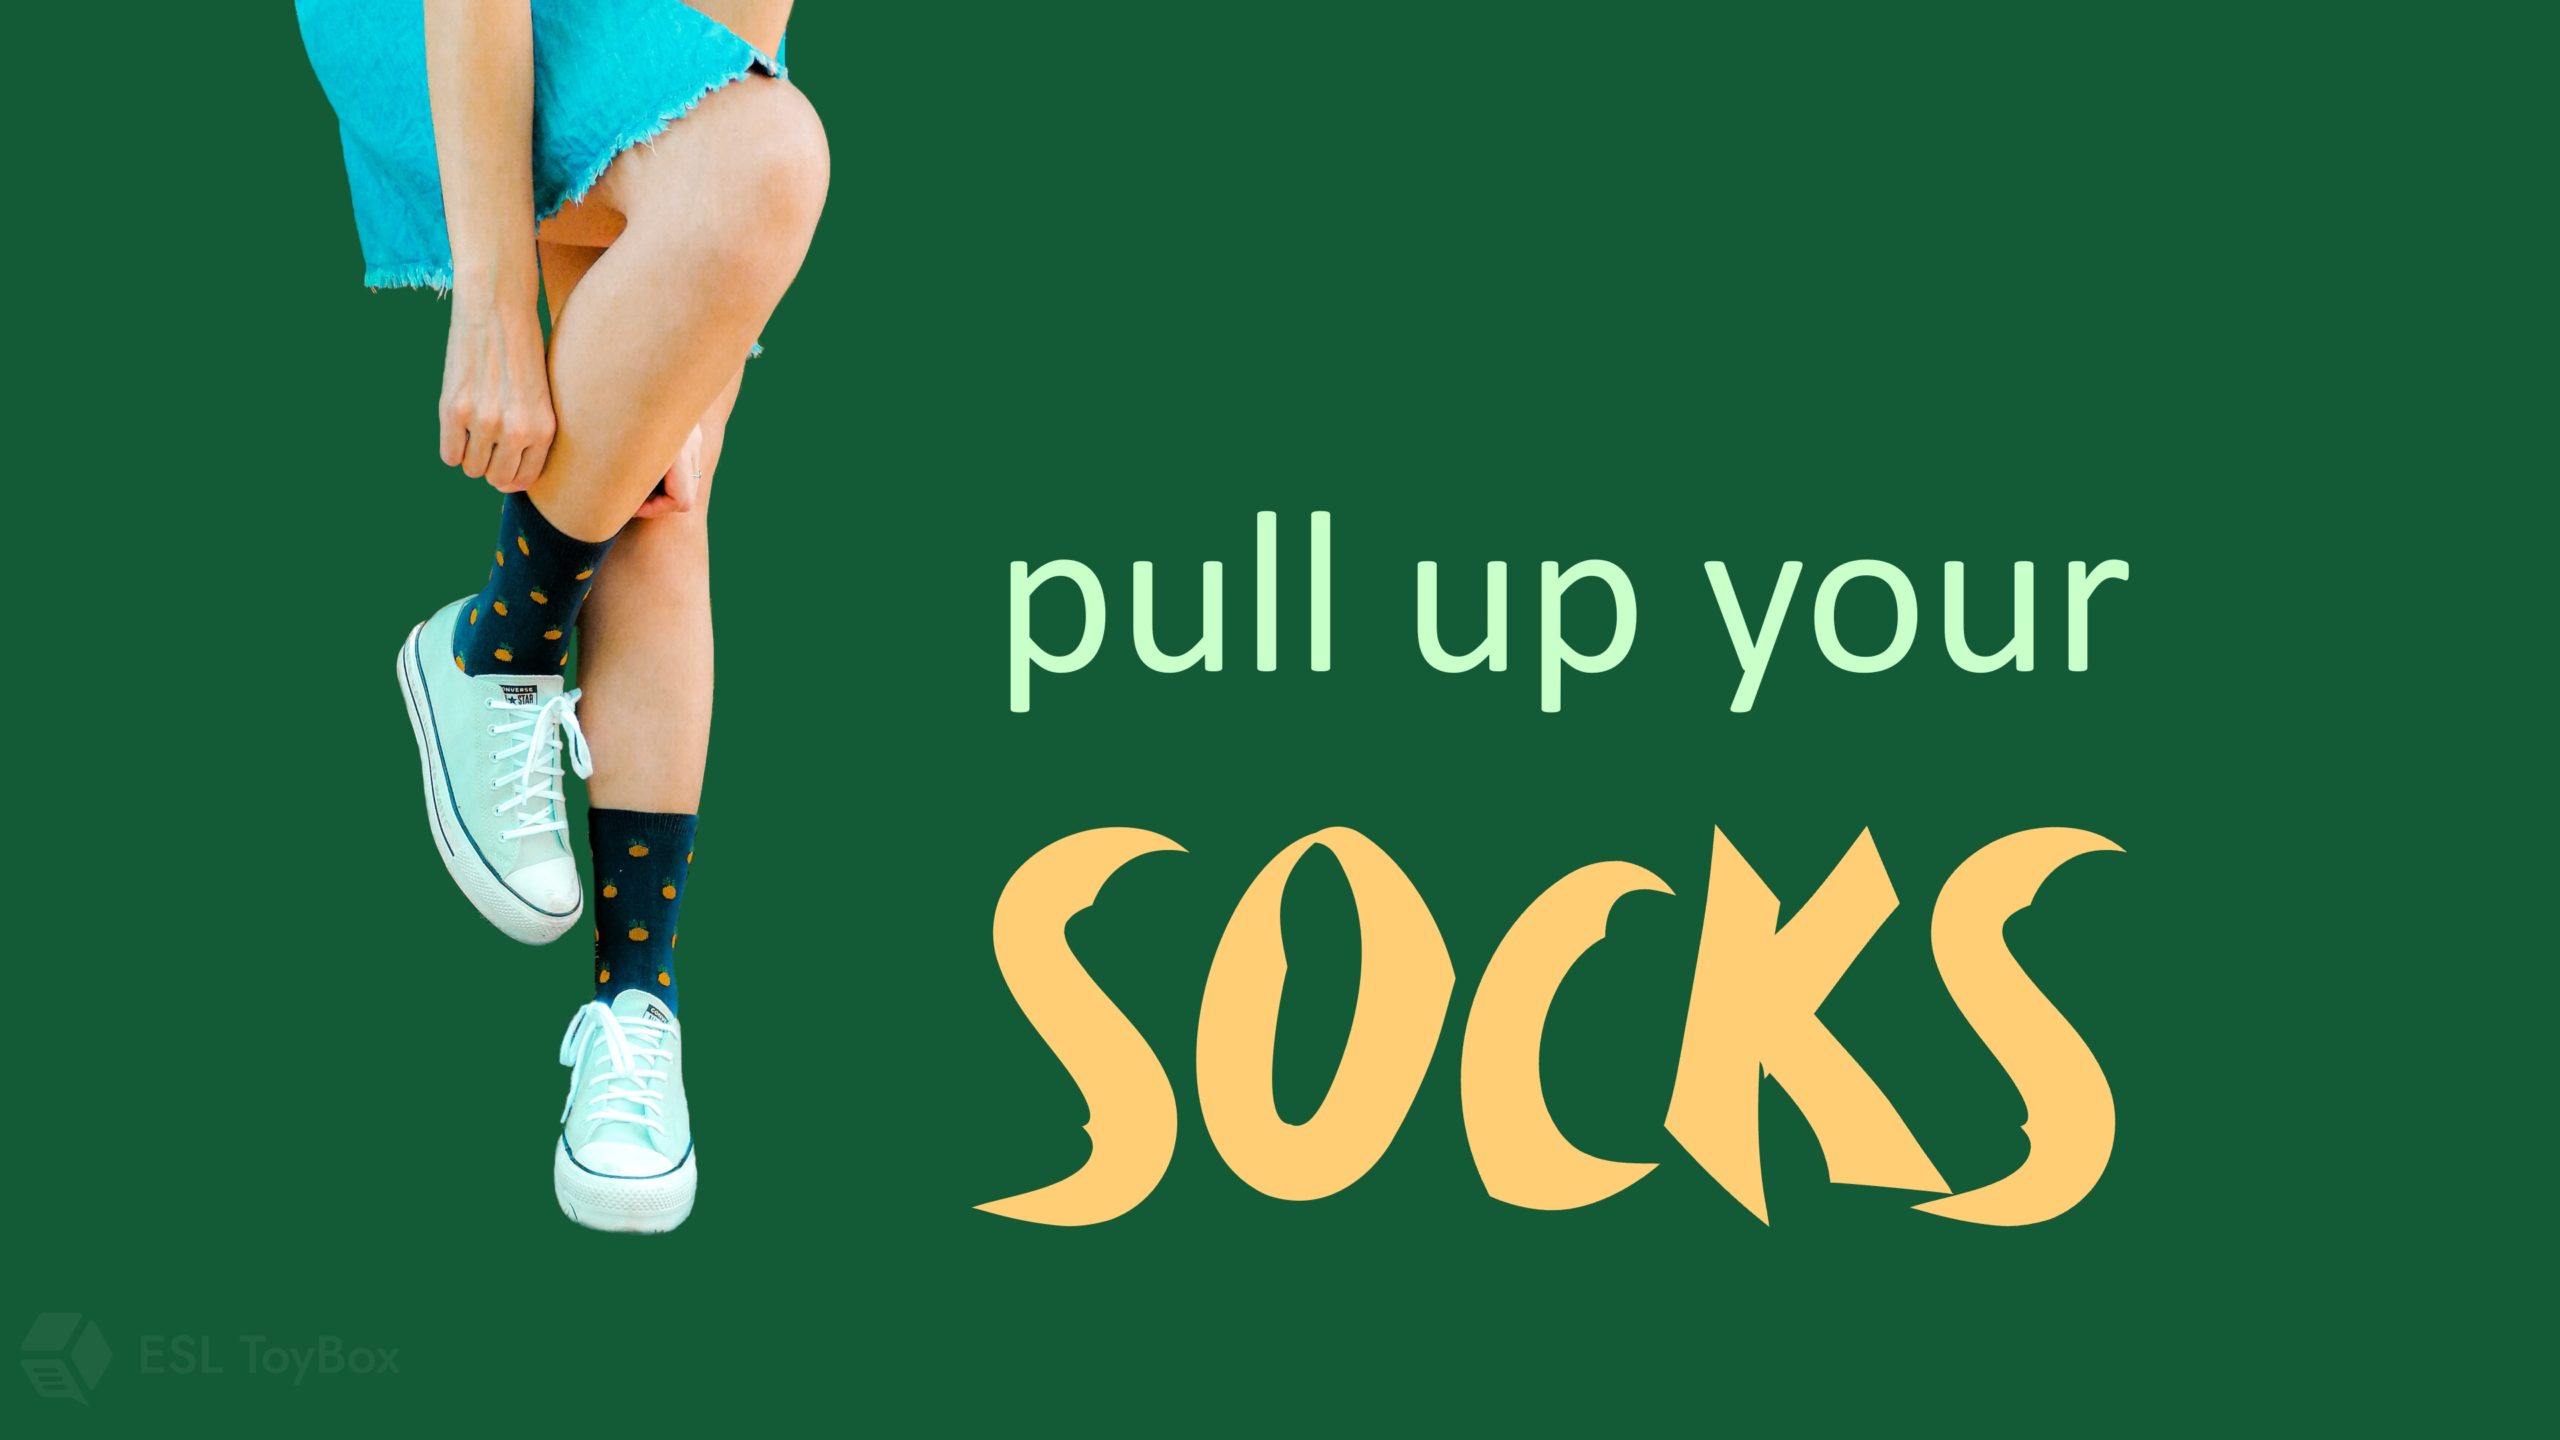 Pull Up Your Socks